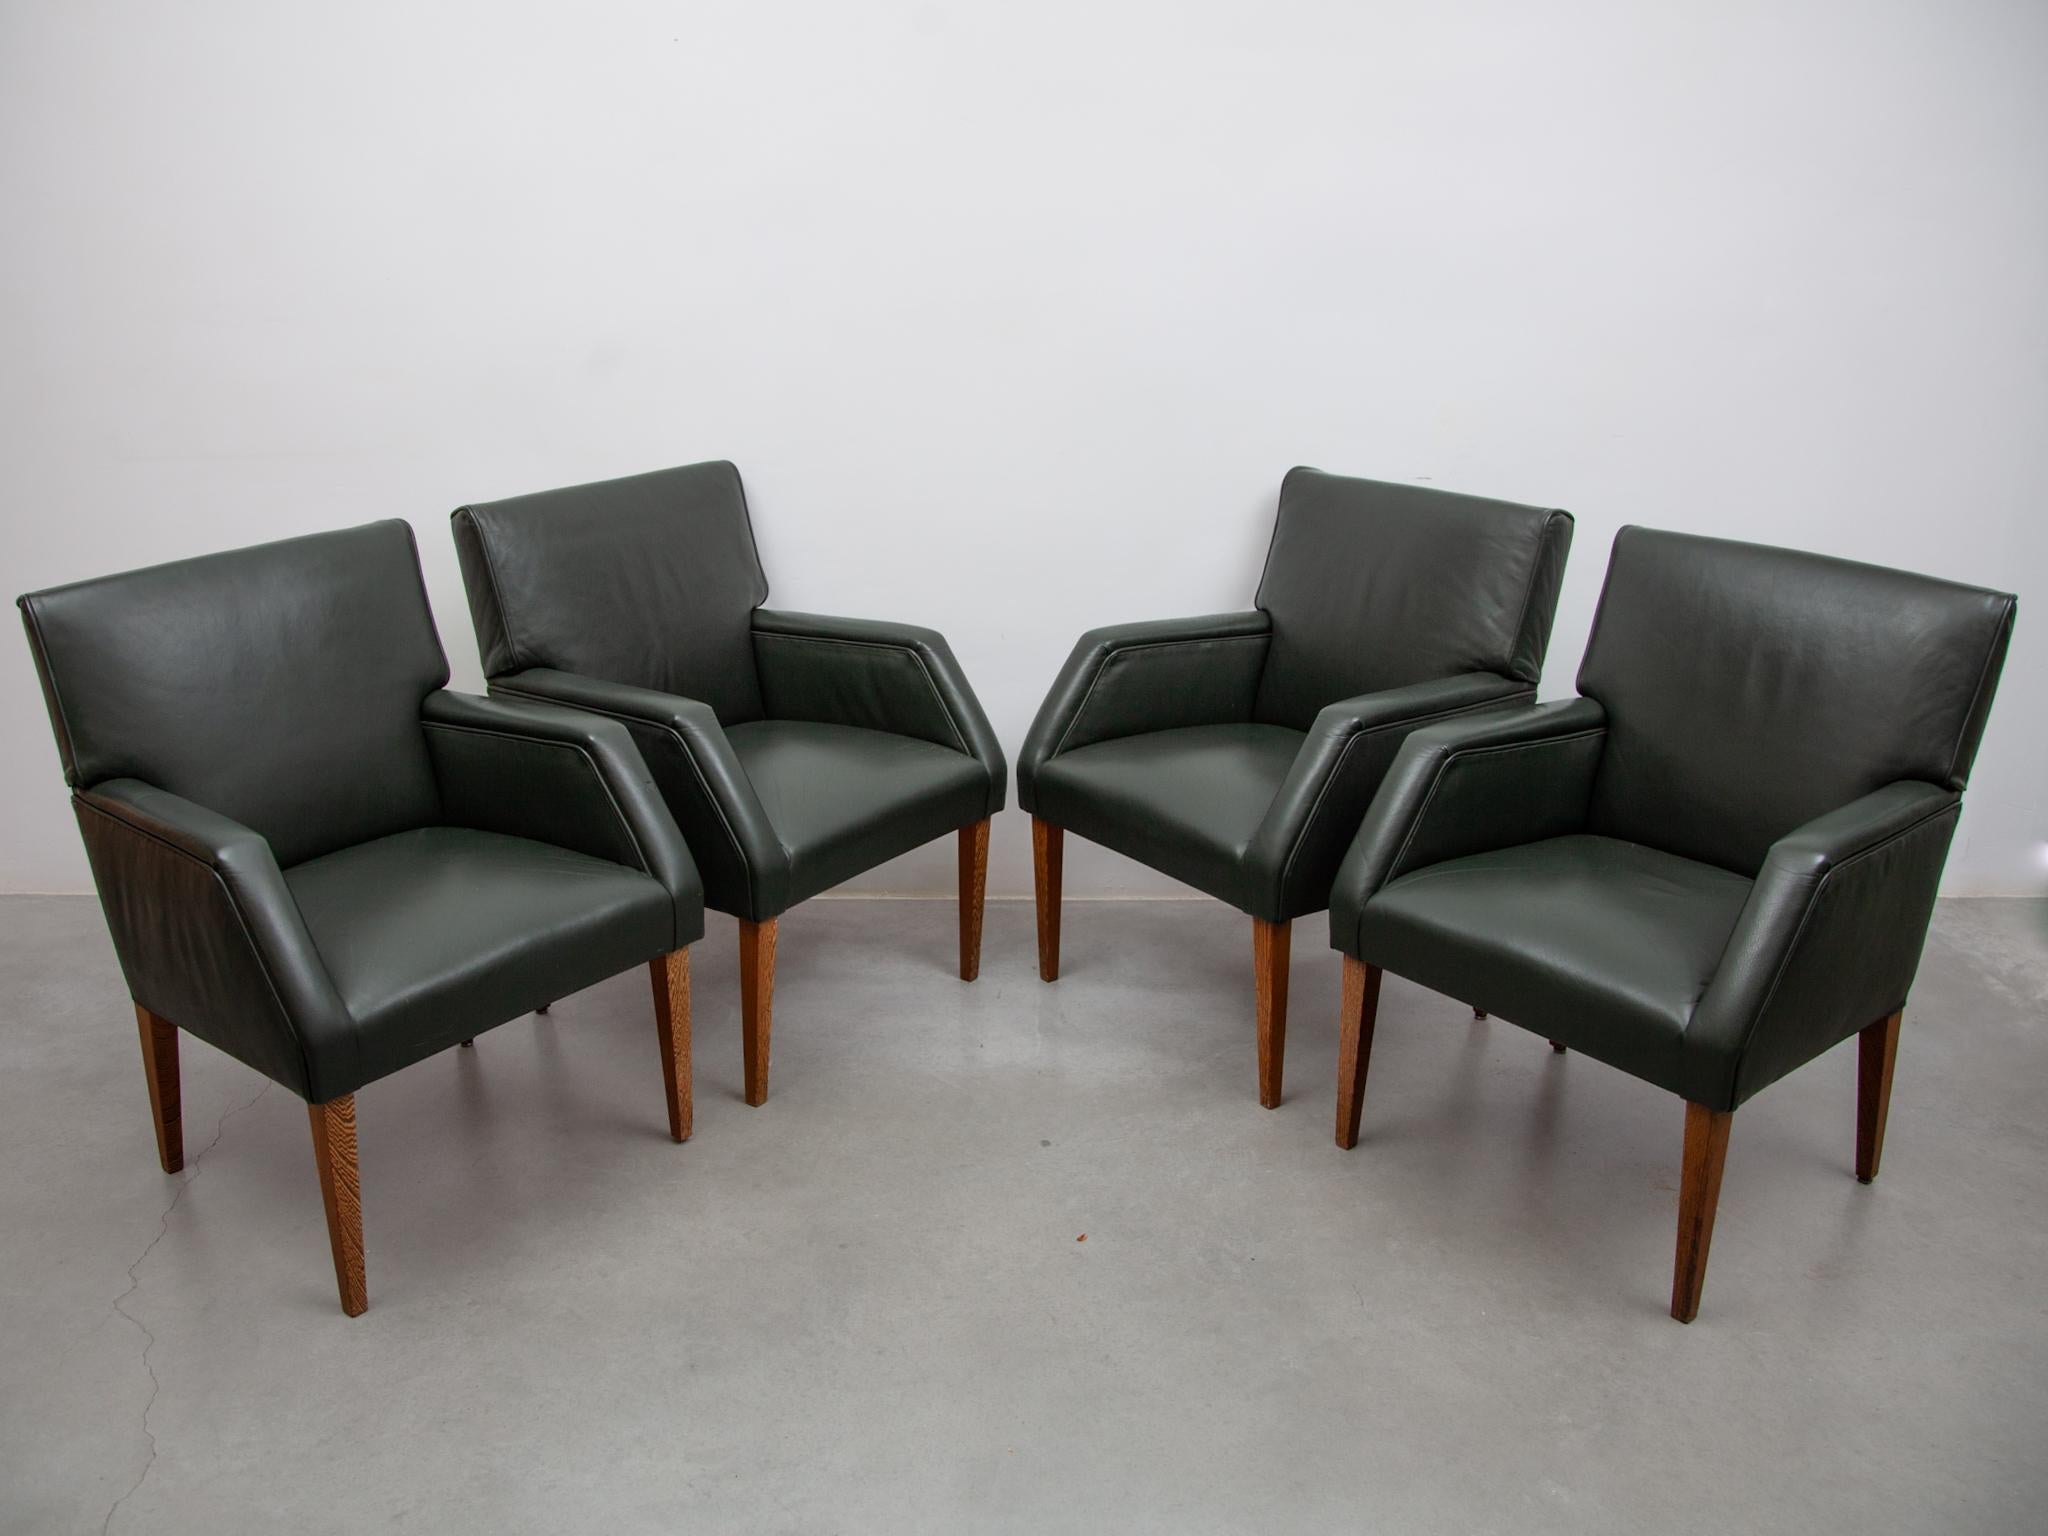 Set of Four Green Leather Arm Lounge Chairs, Denmark For Sale 7